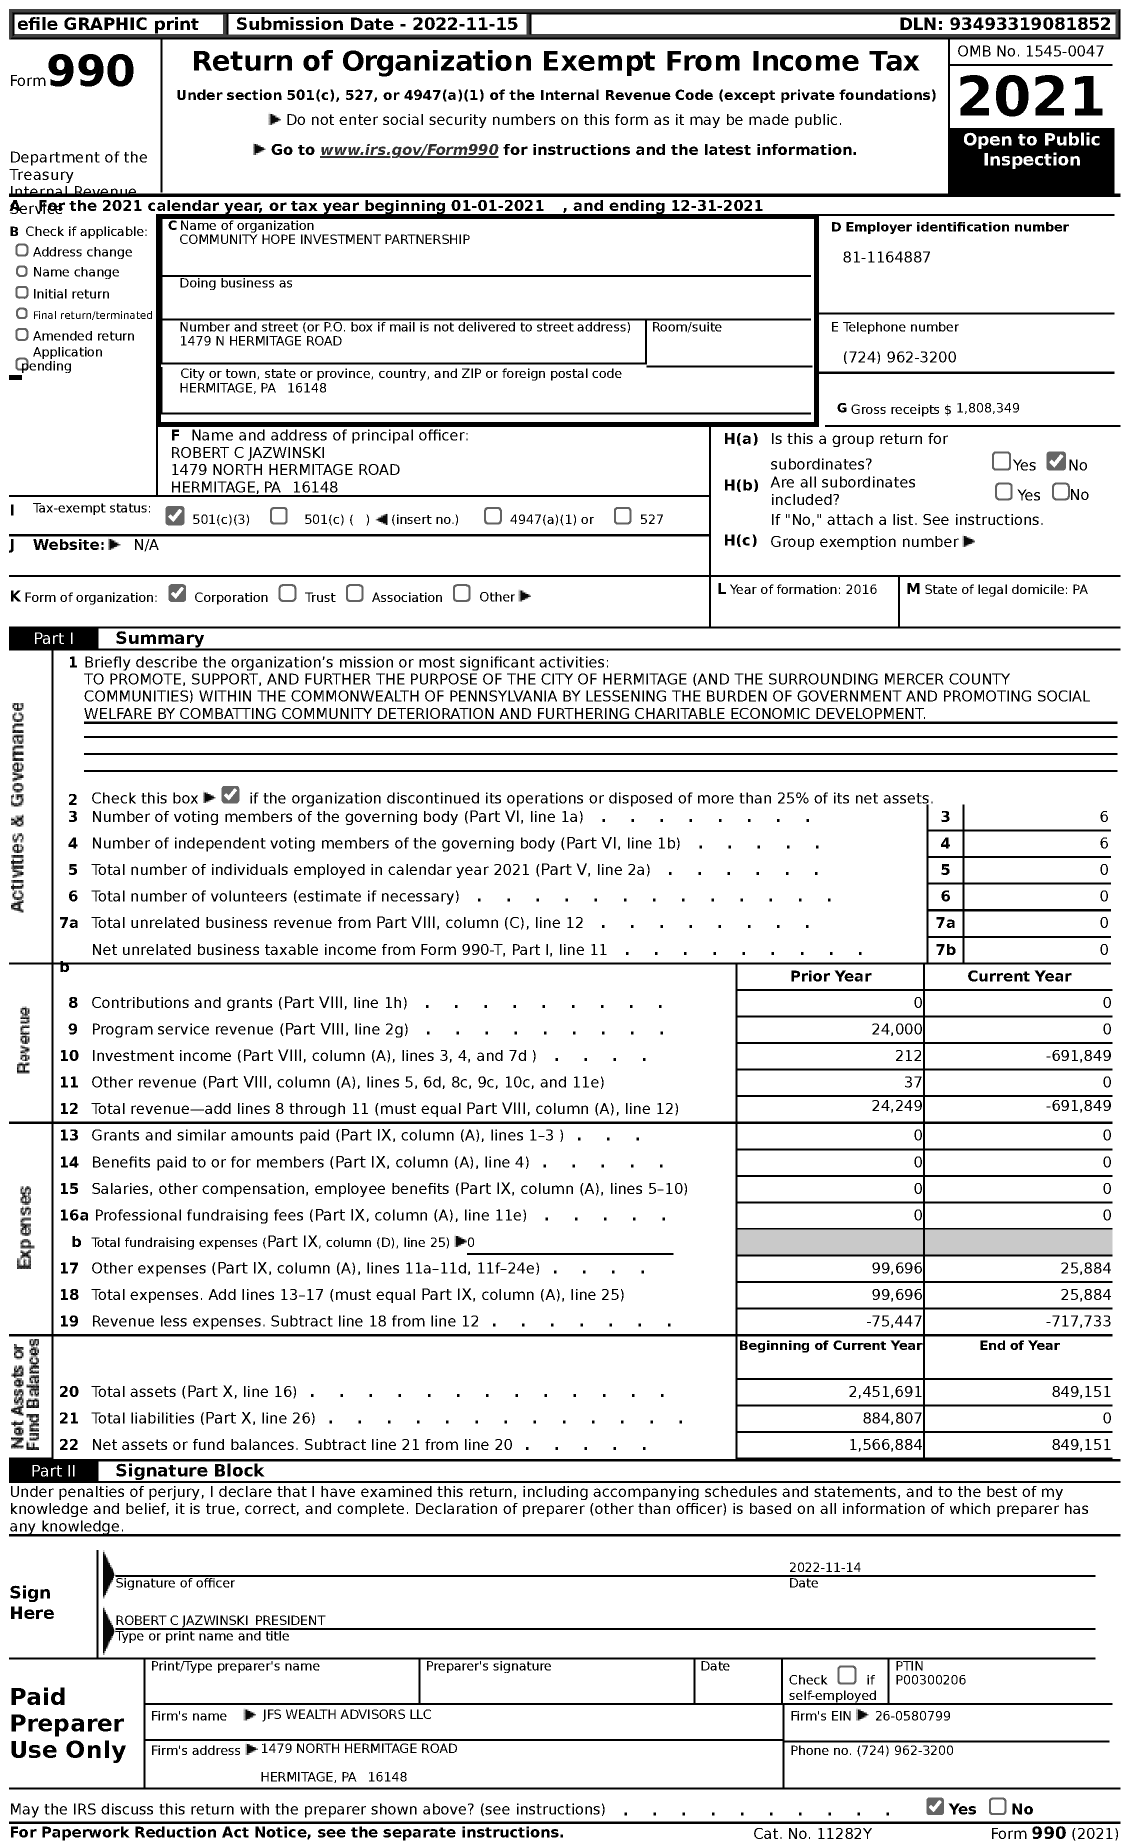 Image of first page of 2021 Form 990 for Community Hope Investment Partnership